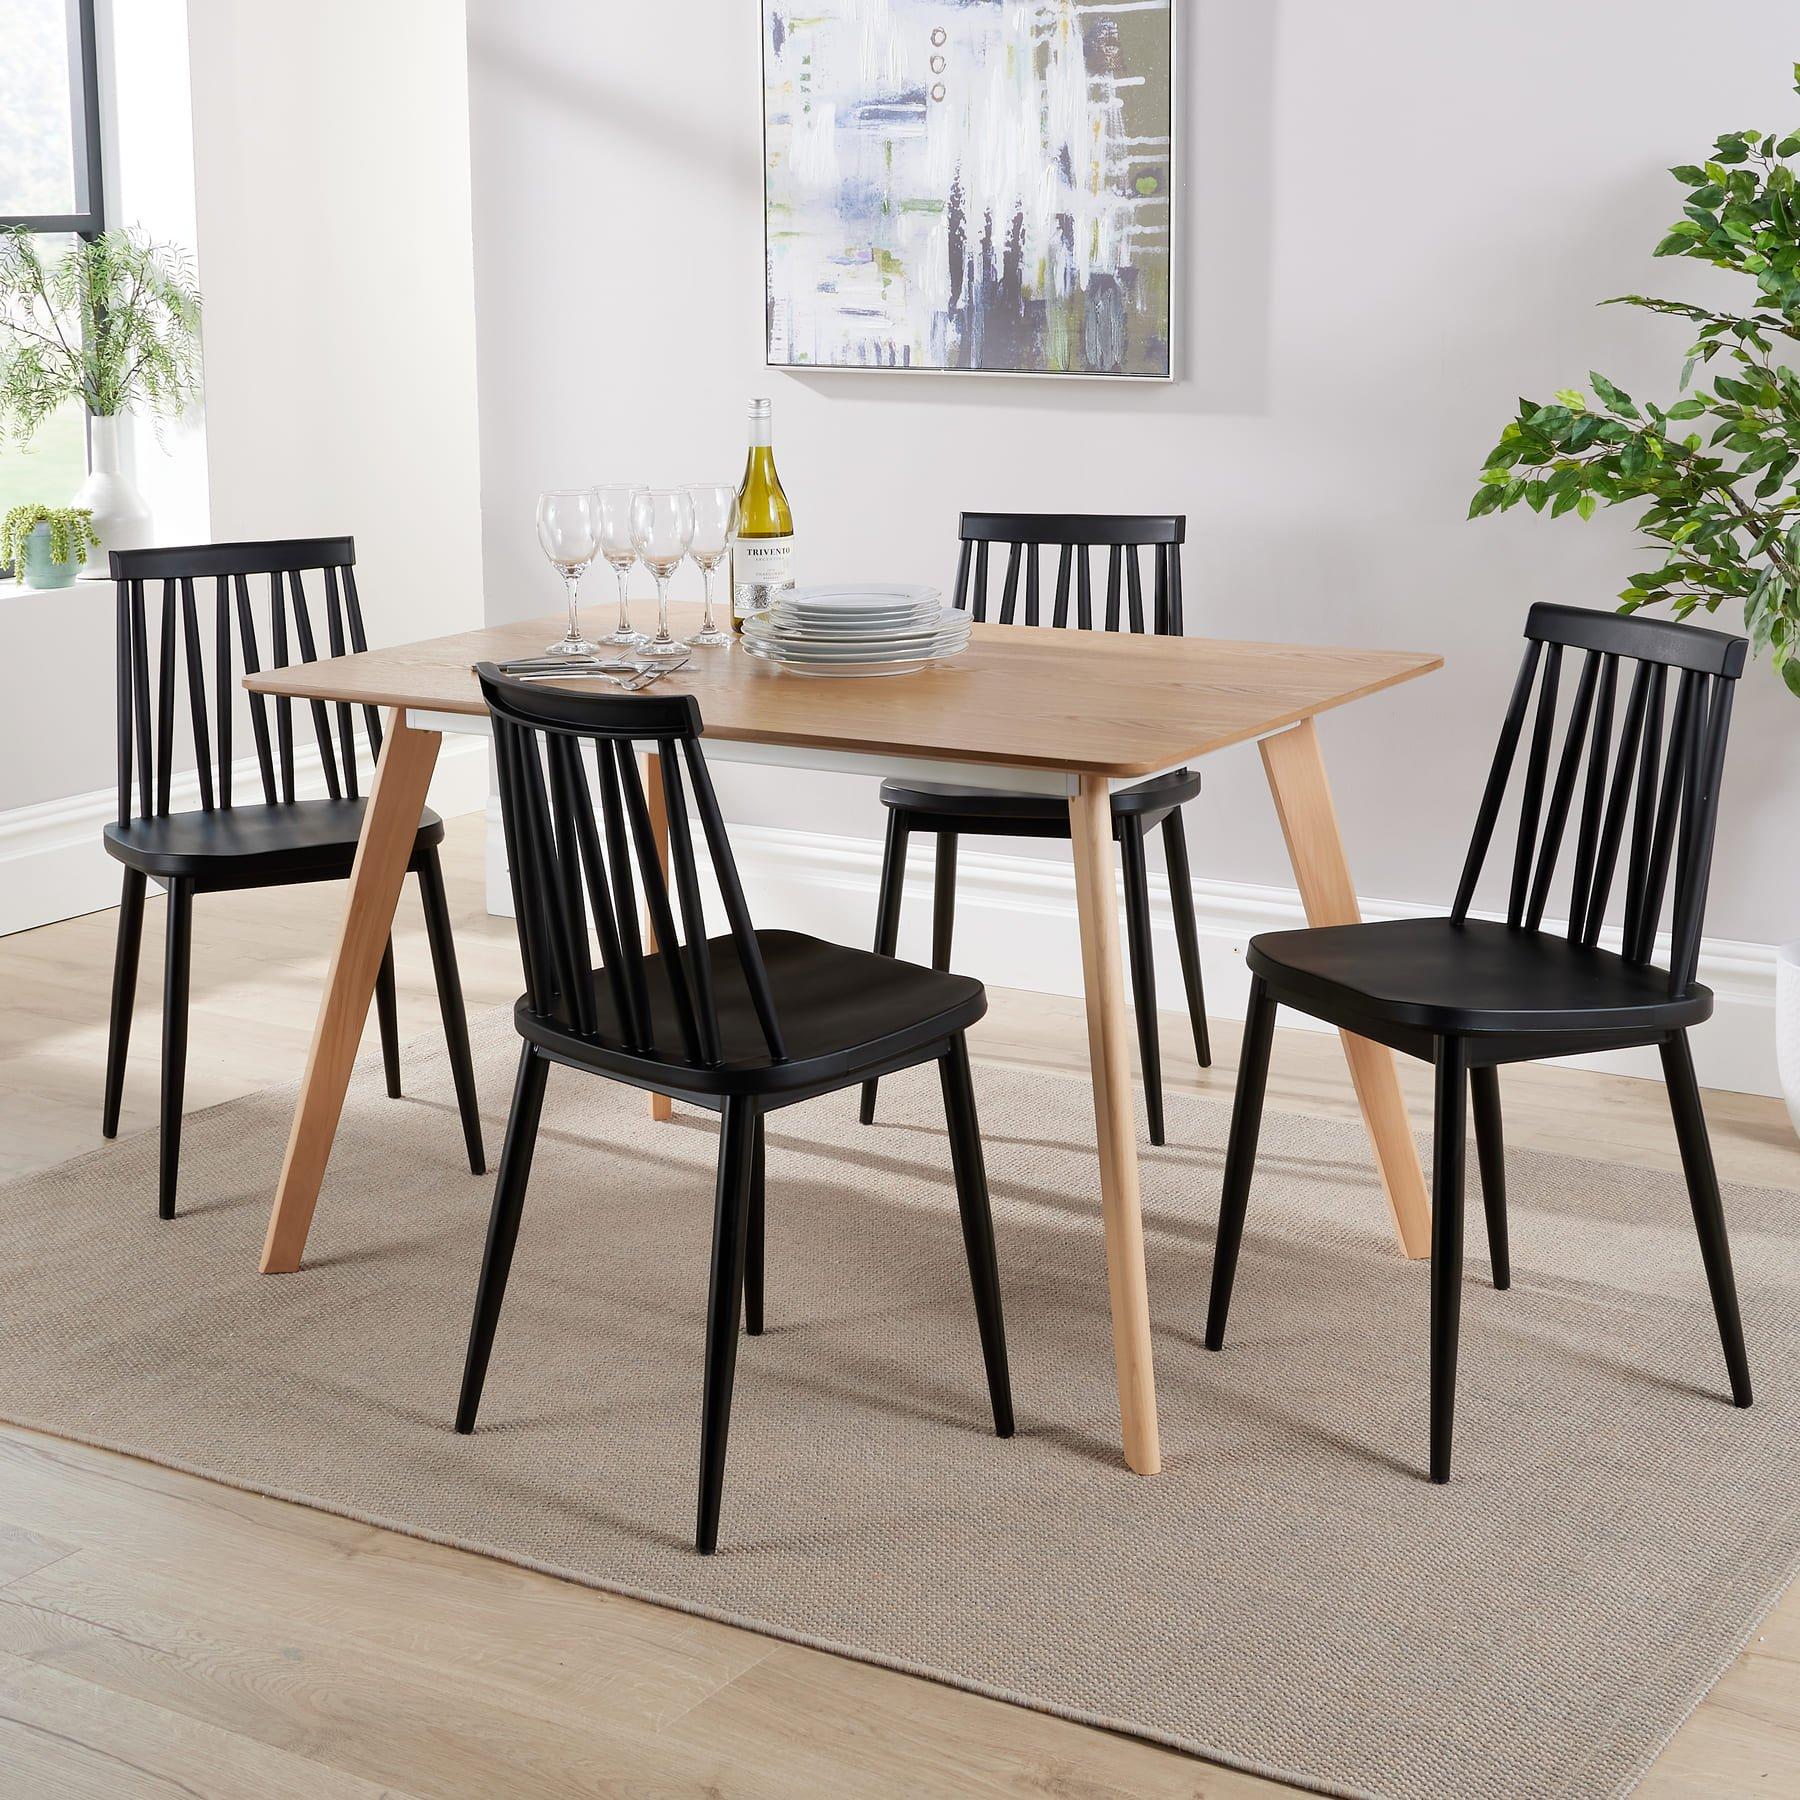 Rayna Table and 4 Lucy Chairs Dining Set